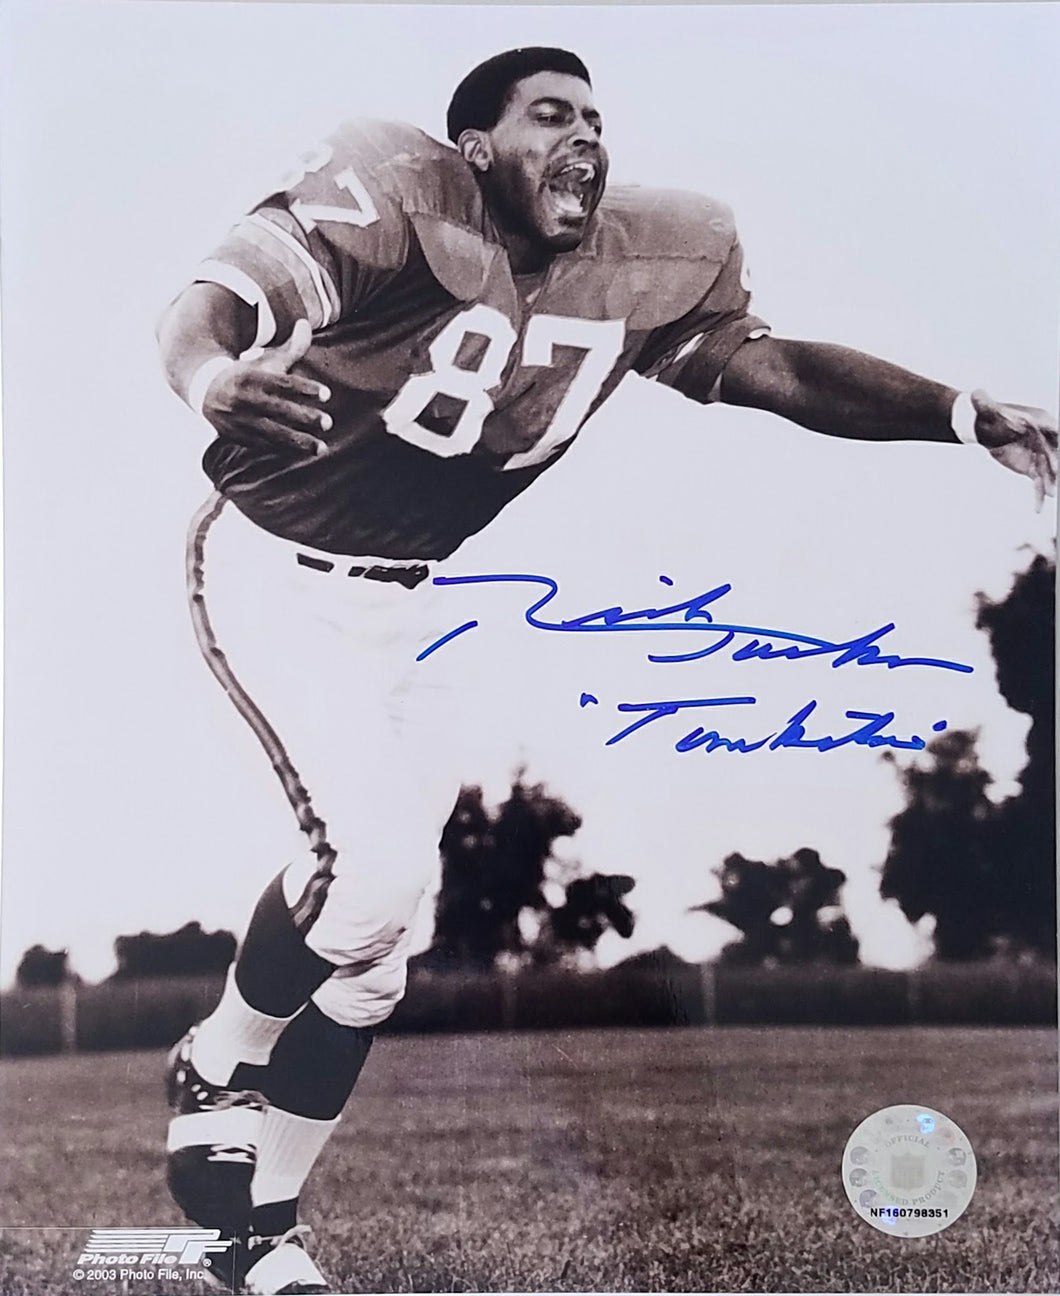 Rich Tombstone Jackson  Signed Autographed 8x10